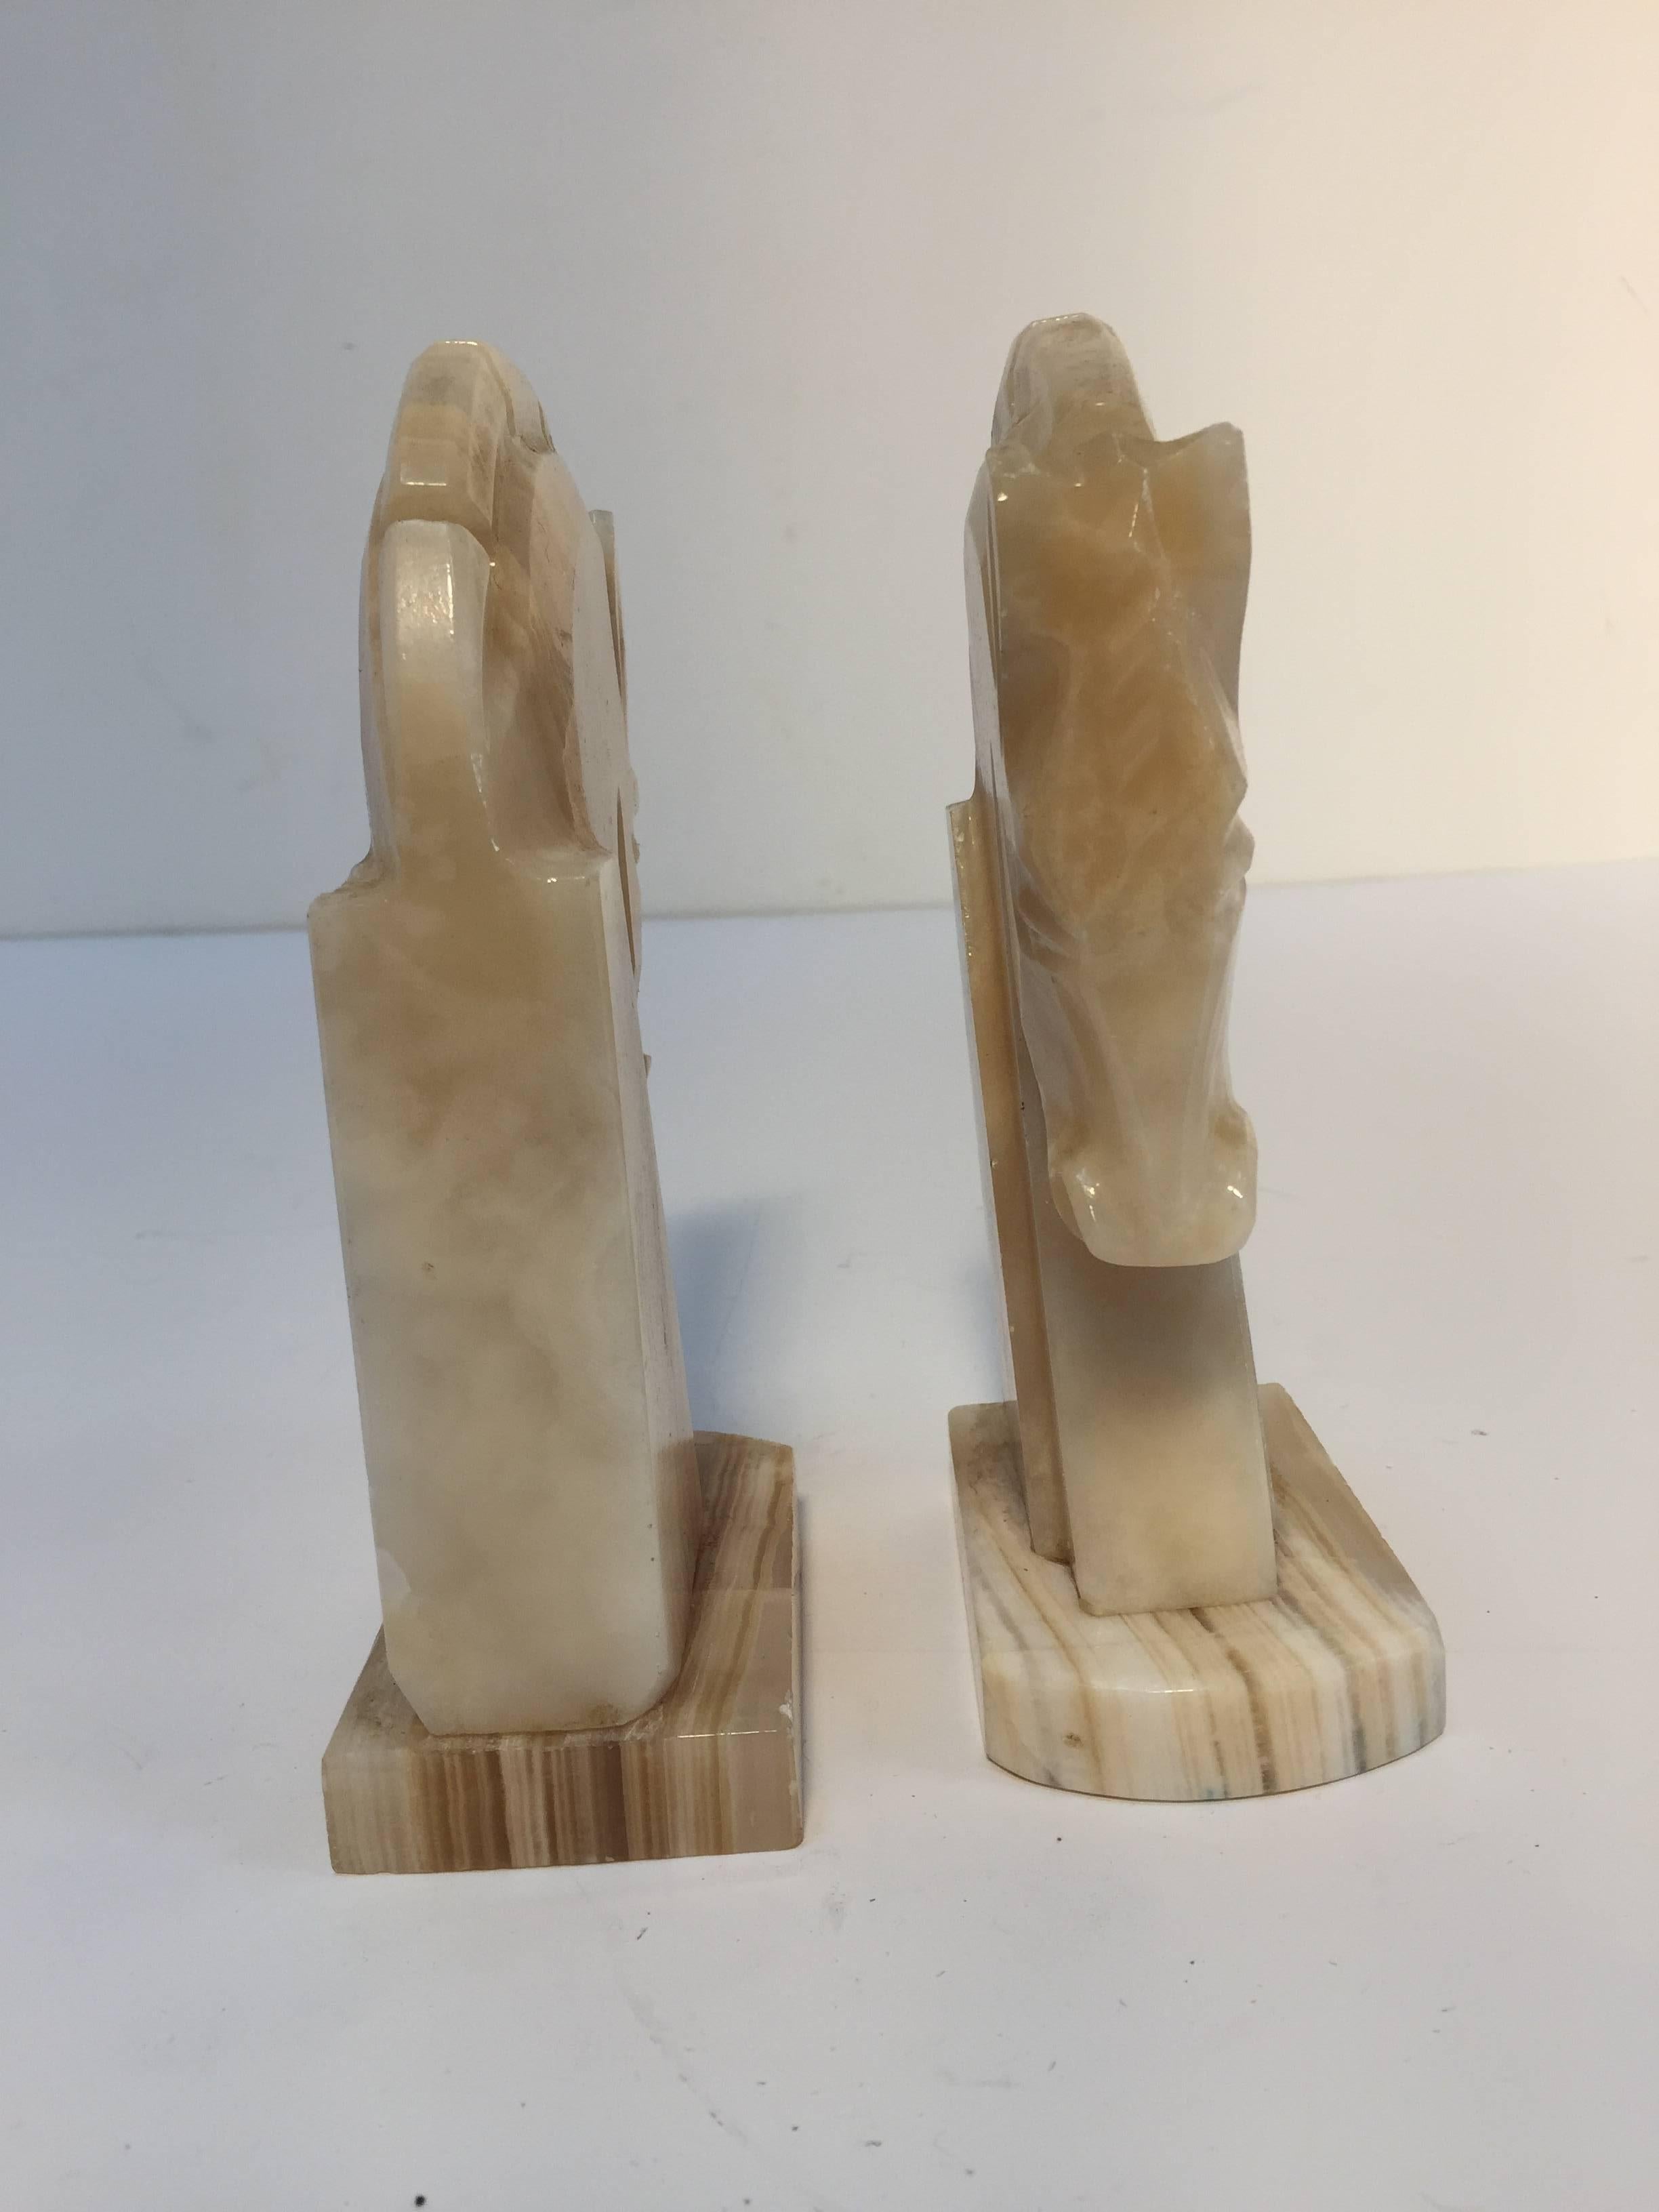 20th Century Pair of Art Deco Onyx Horses Heads Bookends